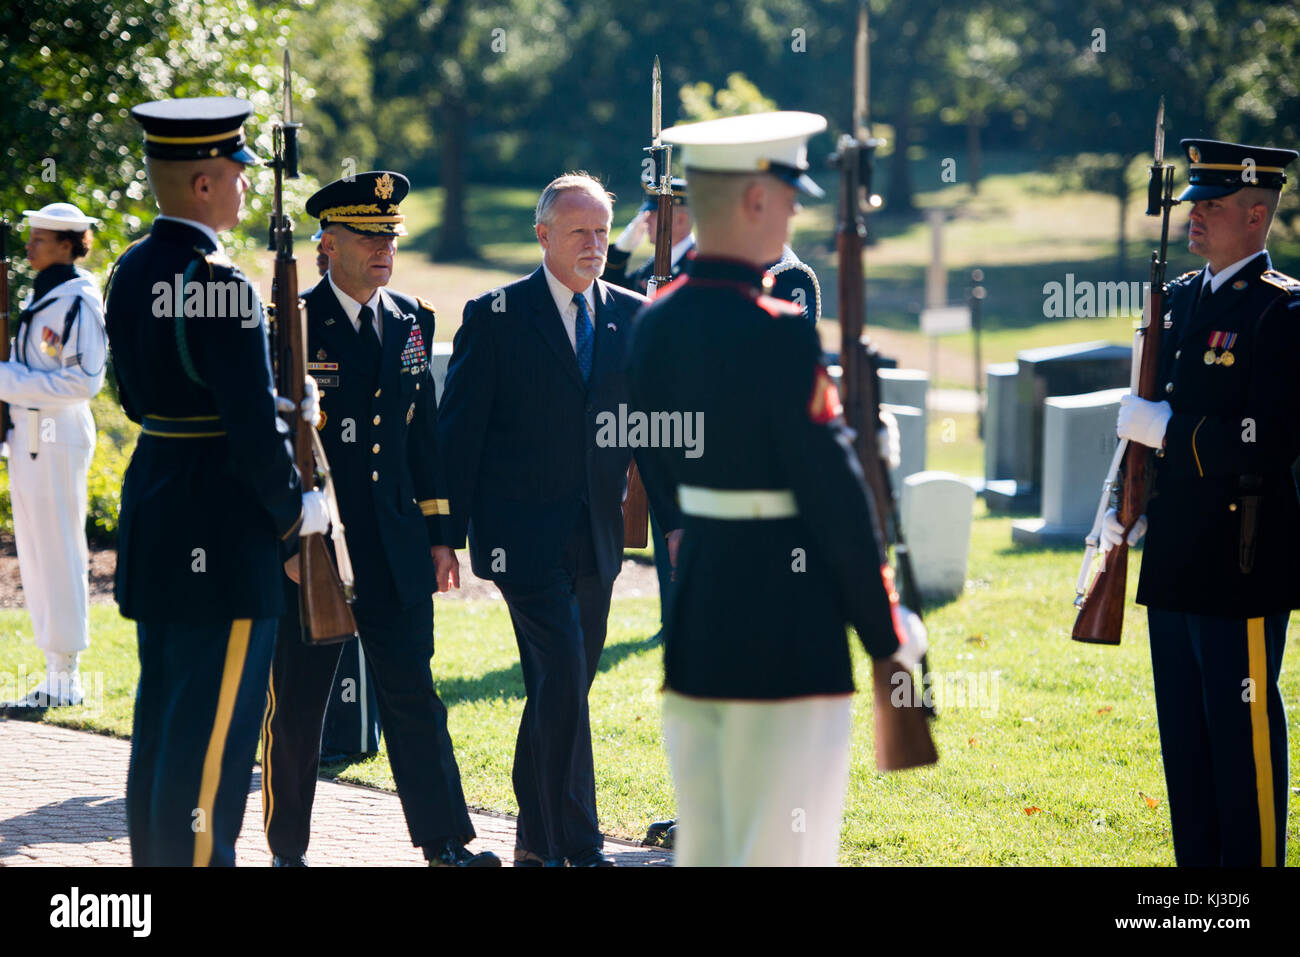 The U.S. Army Military District of Washington conducts a Presidential Armed Forces Full Honor Wreath-Laying Ceremony at the grave of President William H. Taft in Arlington National Cemetery to celebrate his 158th birt 0103 Stock Photo